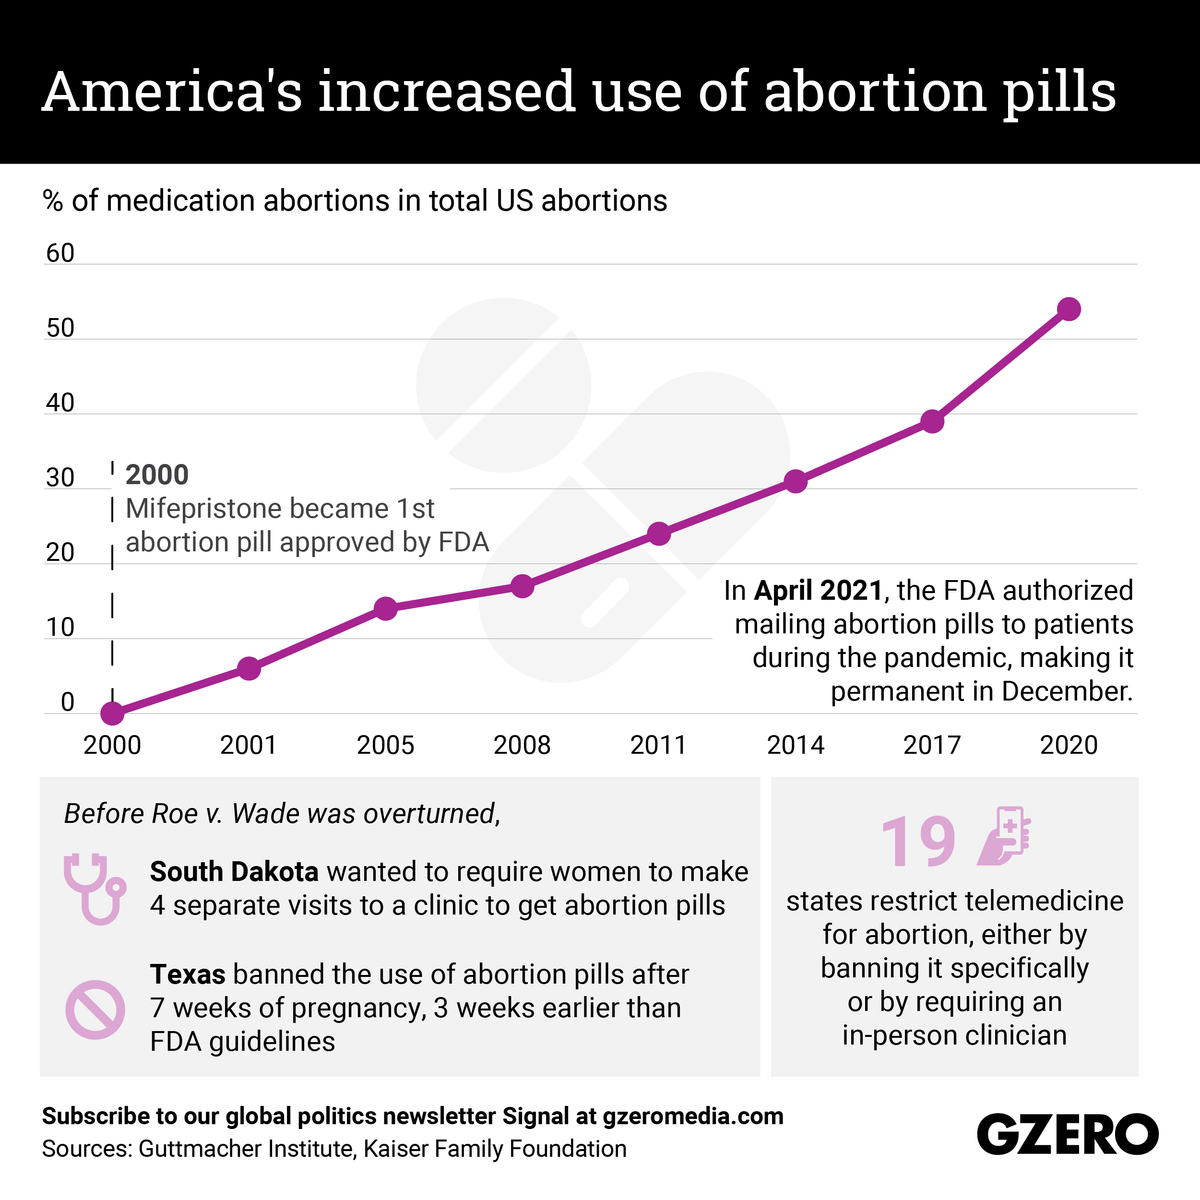 The Graphic Truth: America's increased use of abortion pills